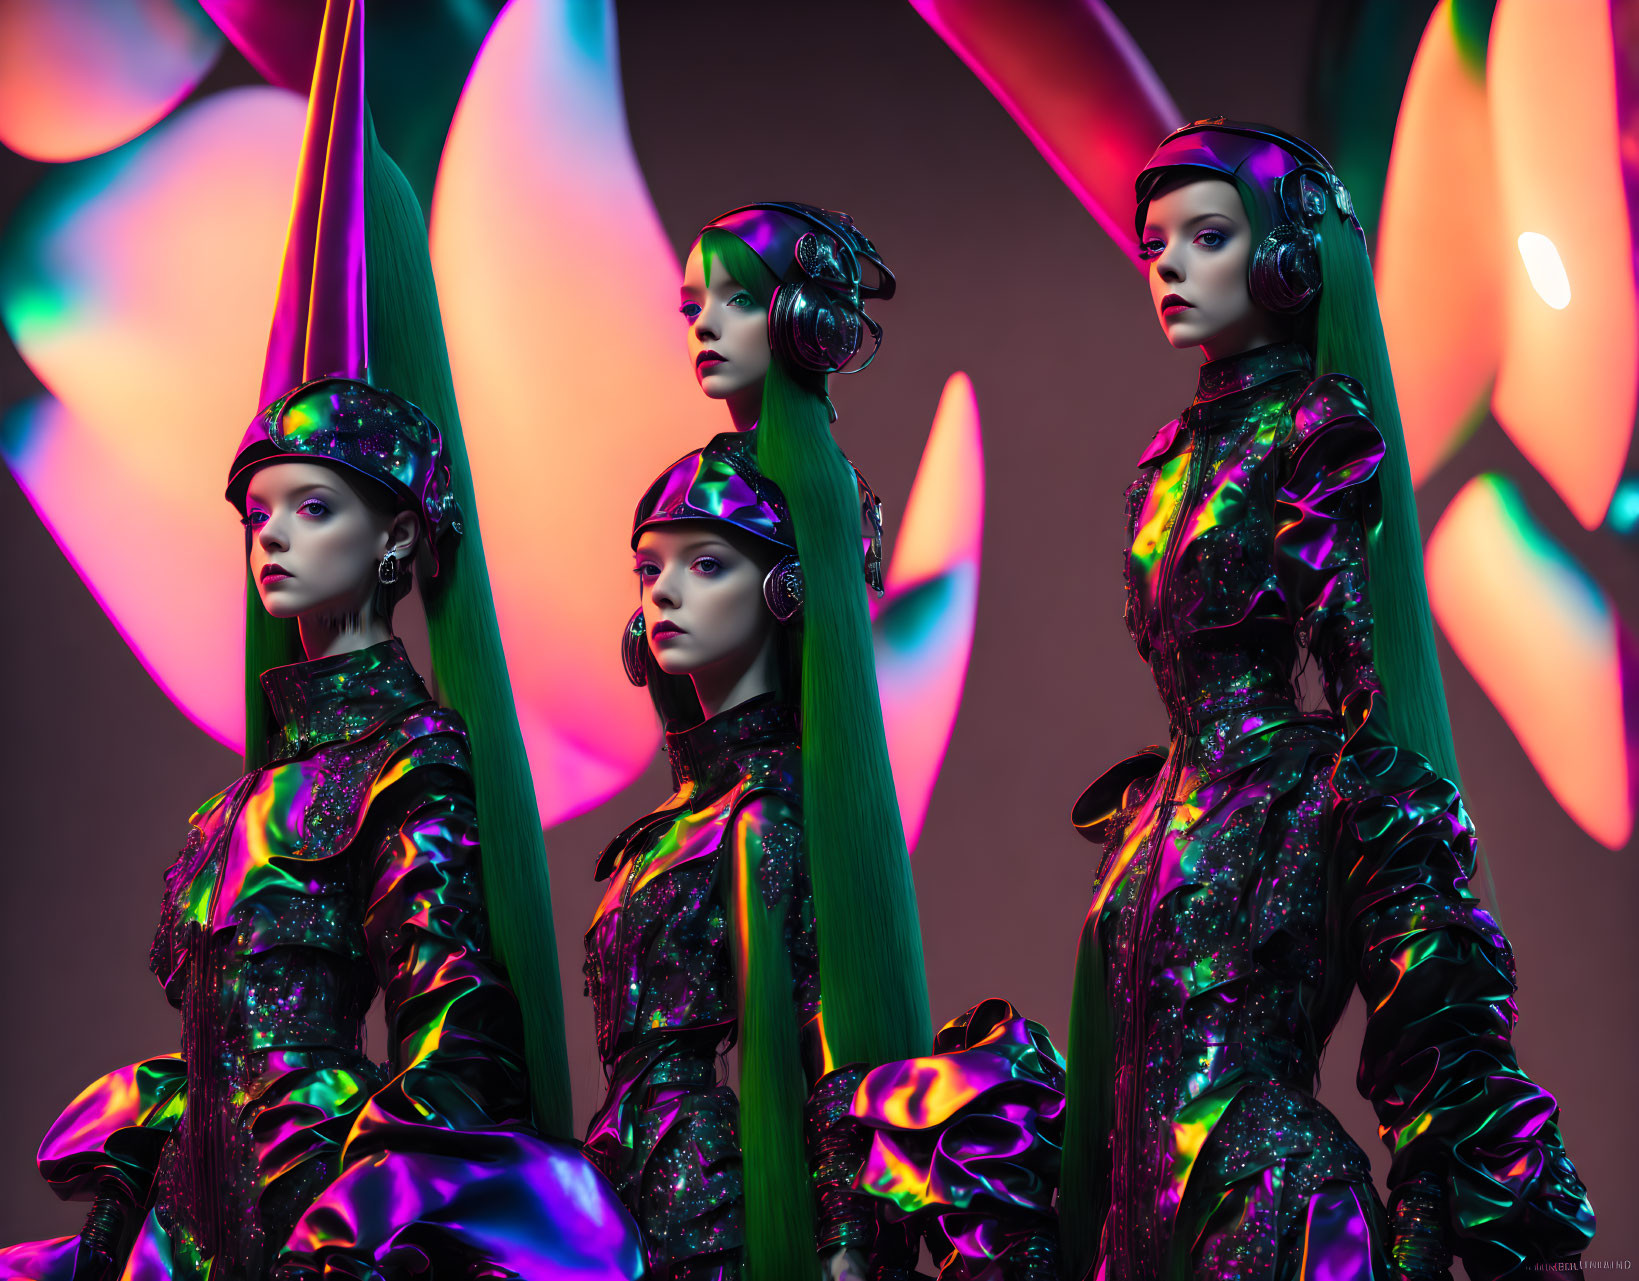 Four futuristic female models in metallic-patterned outfits against multicolored backdrop